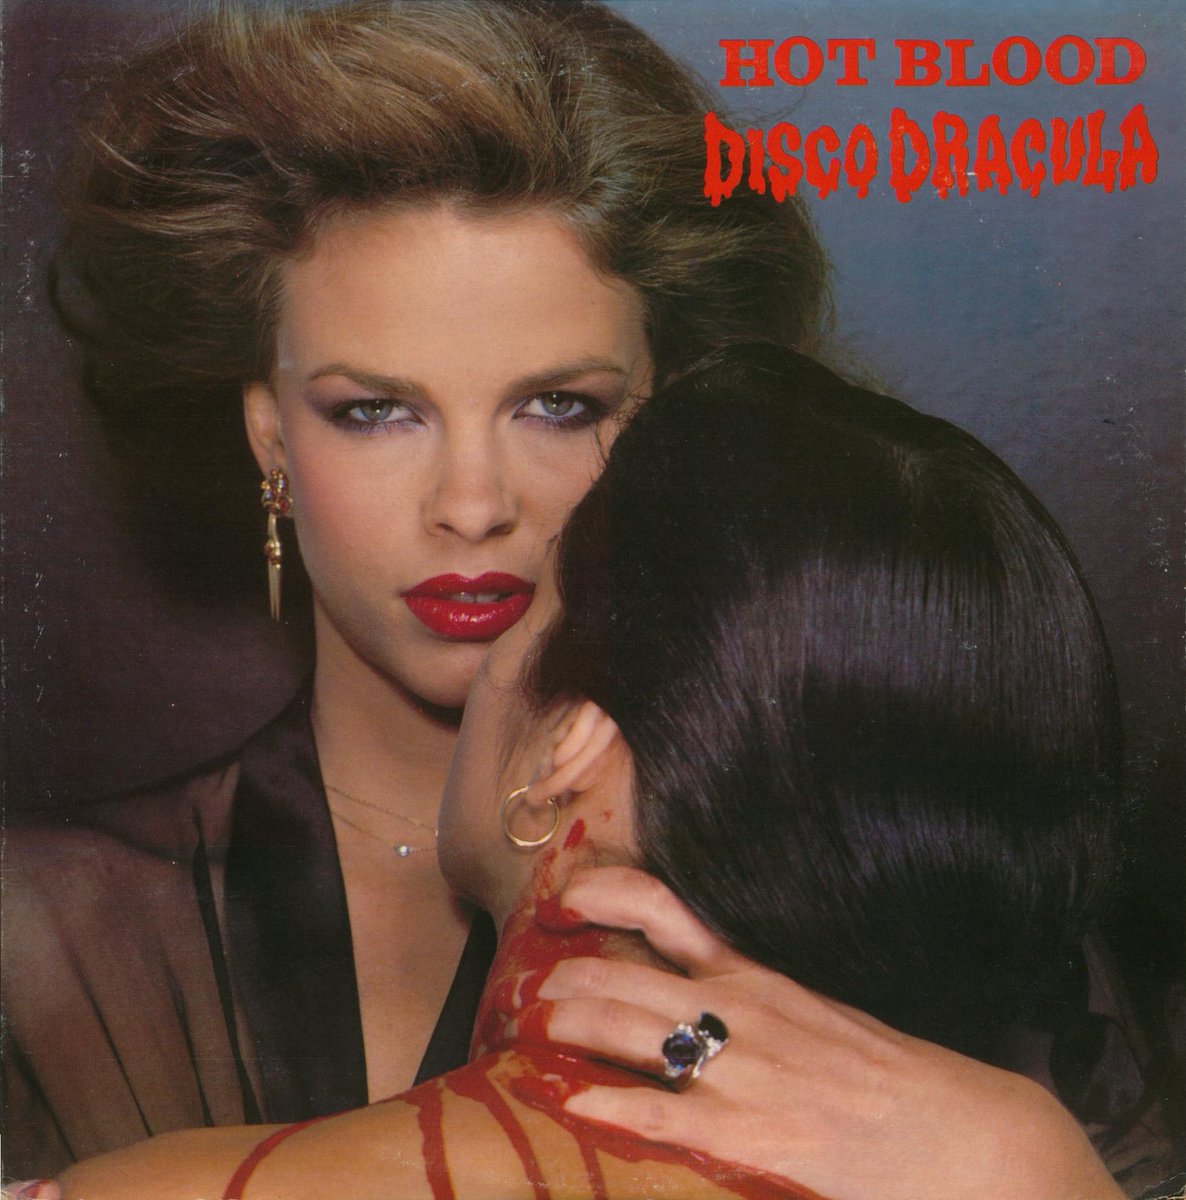 For today (10/1) I'm gonna listen to Disco Dracula by Hot Blood cause disco halloween music, plus this cover, seems sick